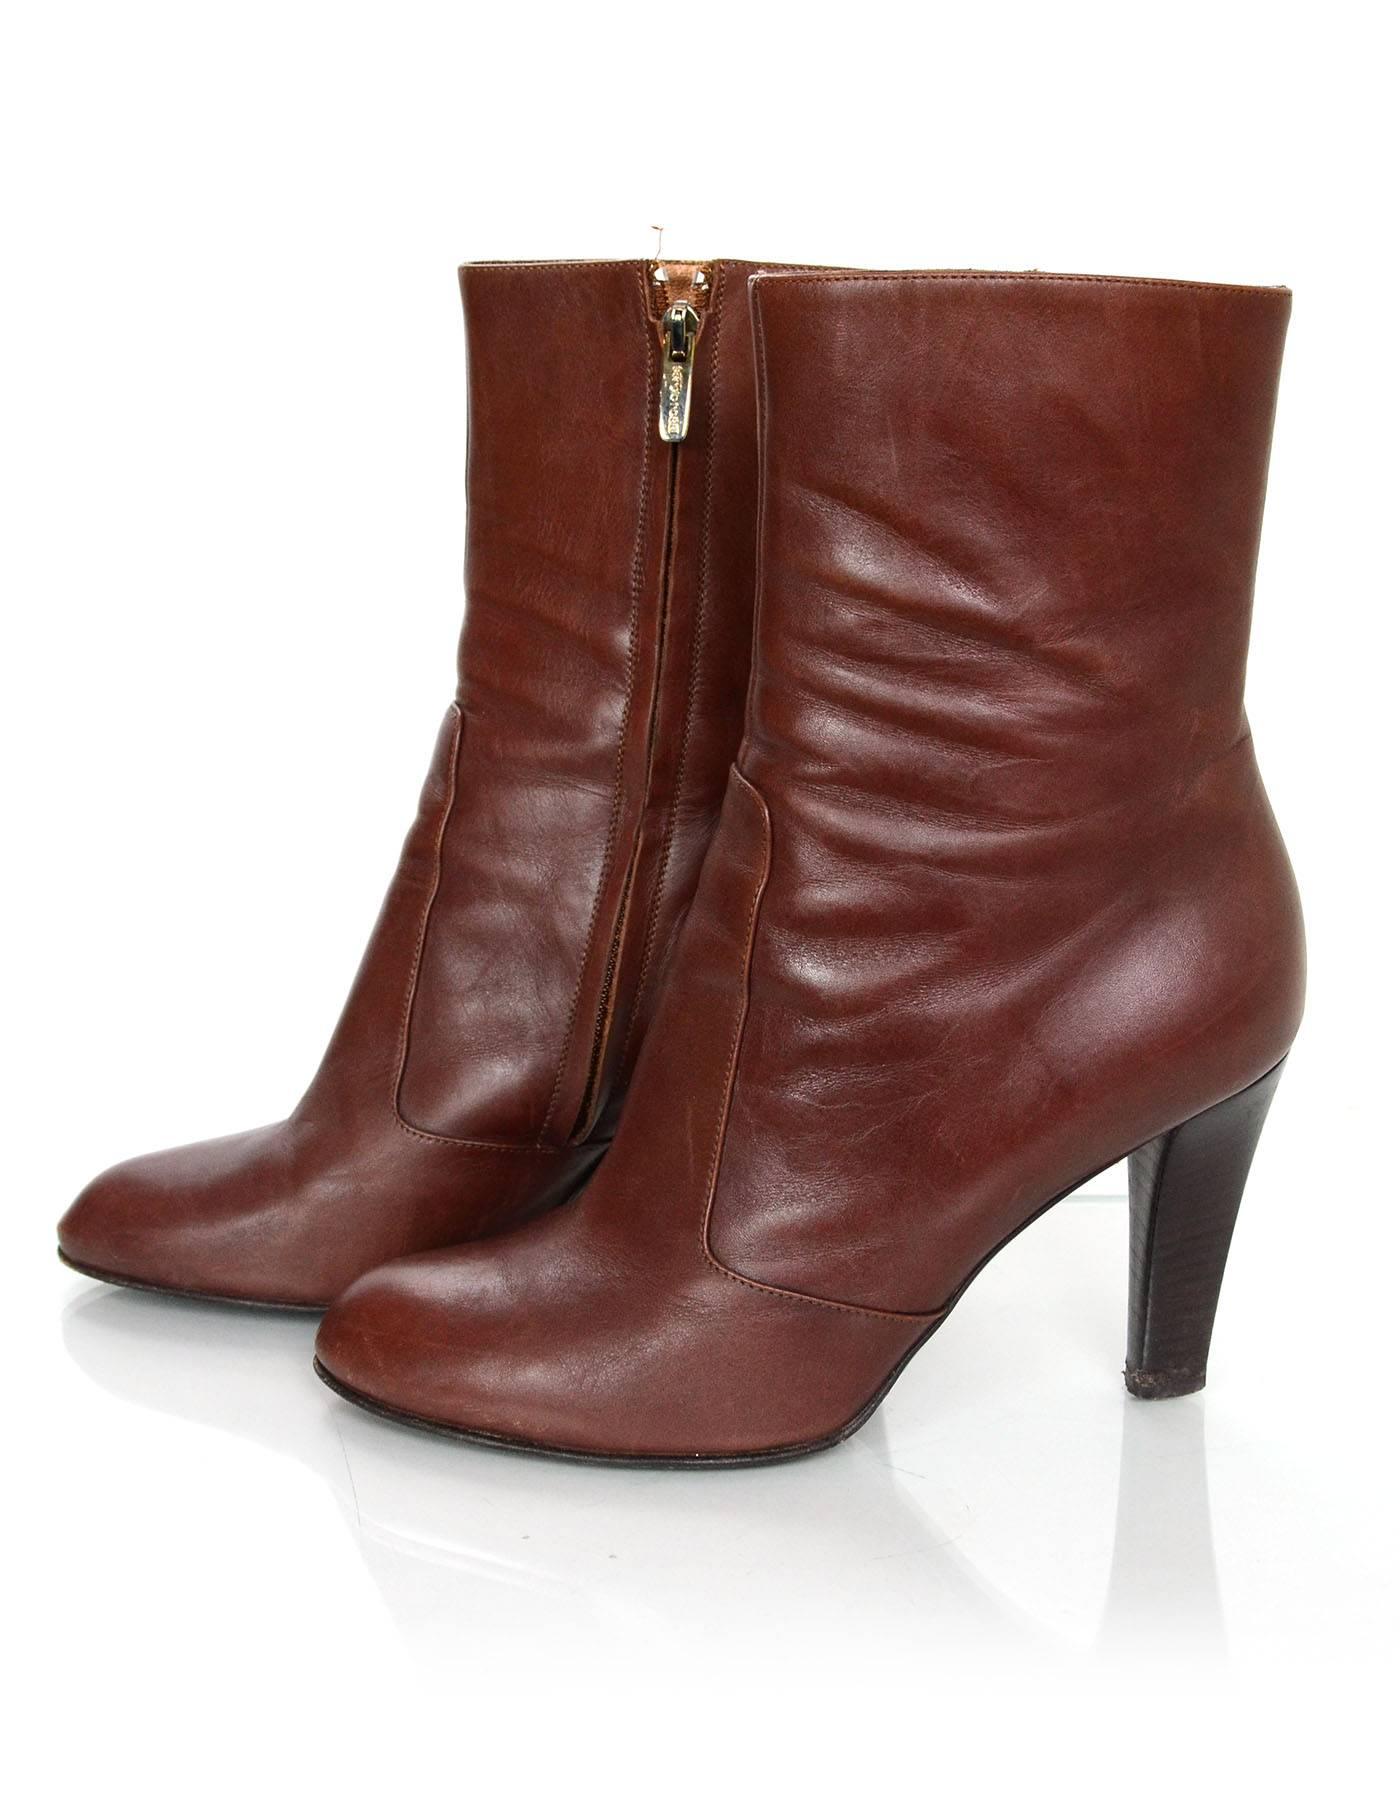 Sergio Rossi Brown Leather Ankle Boots sz 37.5 rt. $675 In Excellent Condition In New York, NY